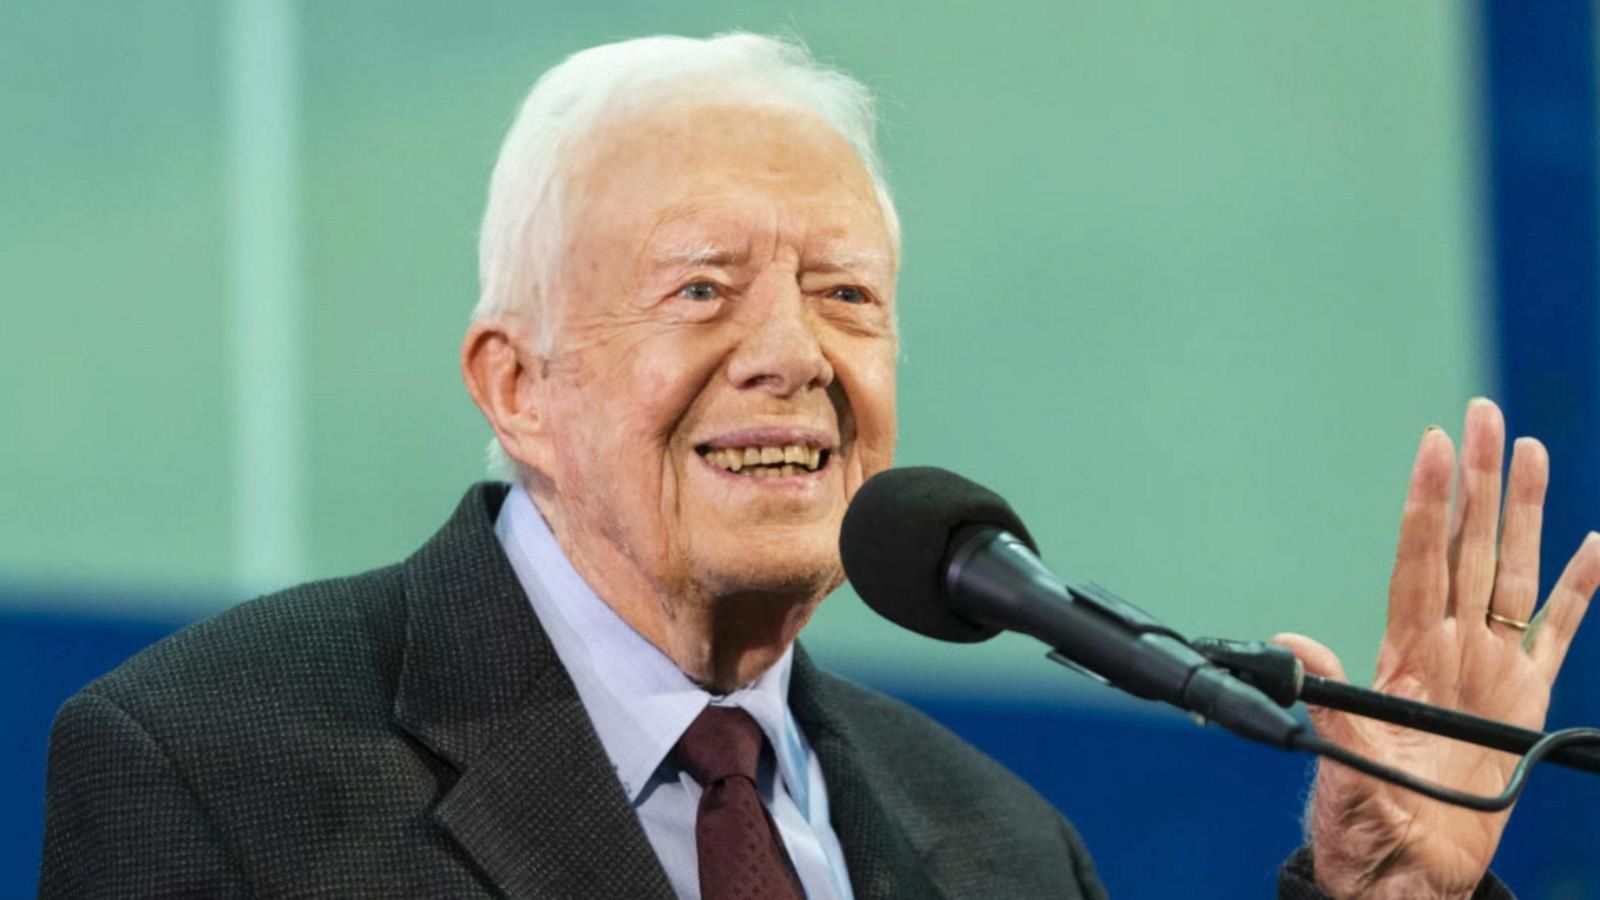 Jimmy Carter turns 99: What to know about his kids, grandkids - ABC News